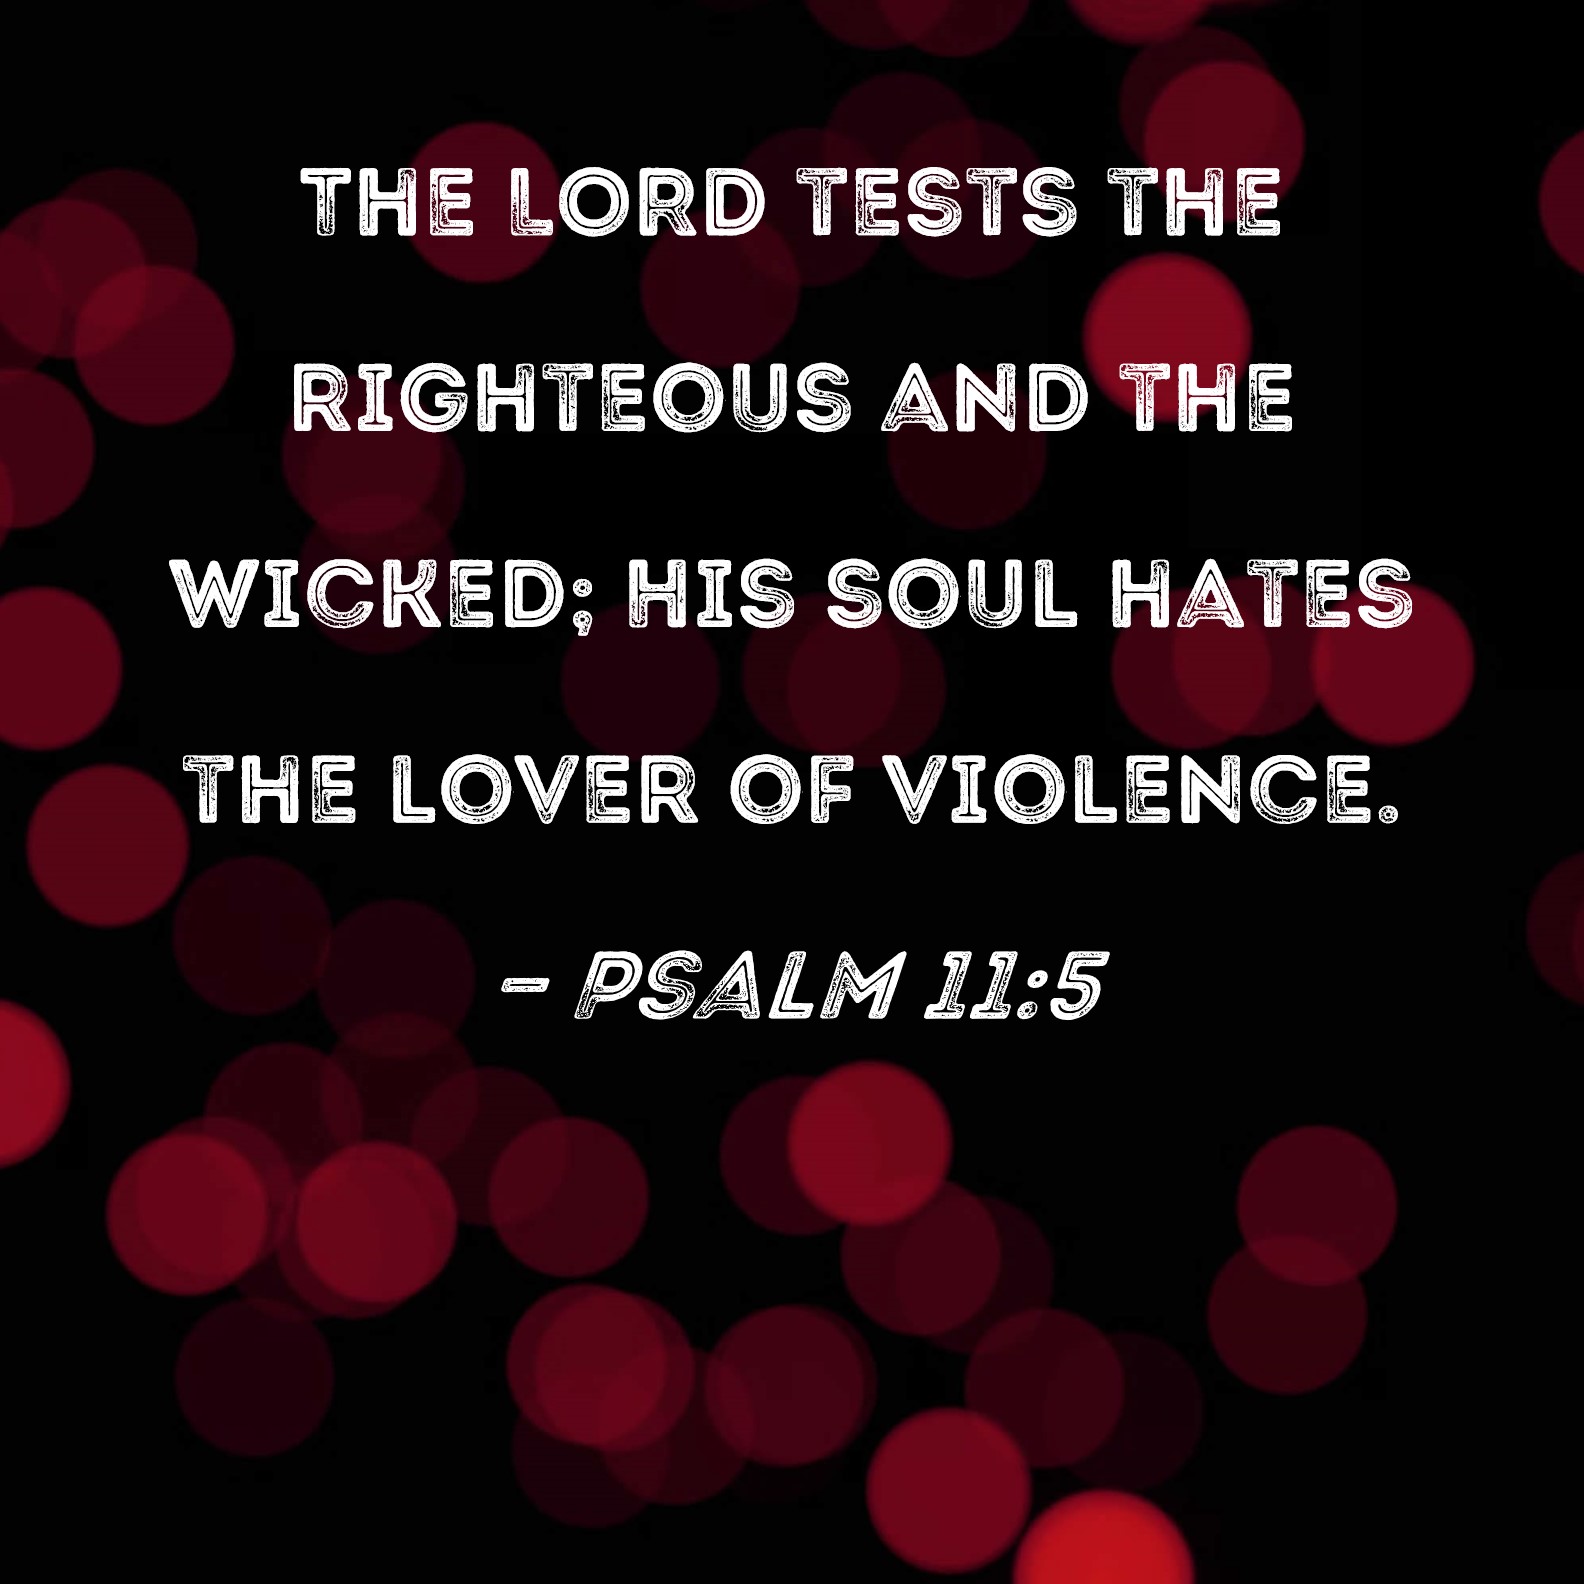 Psalm 11:5 The LORD tests the righteous and the wicked; His soul hates the  lover of violence.